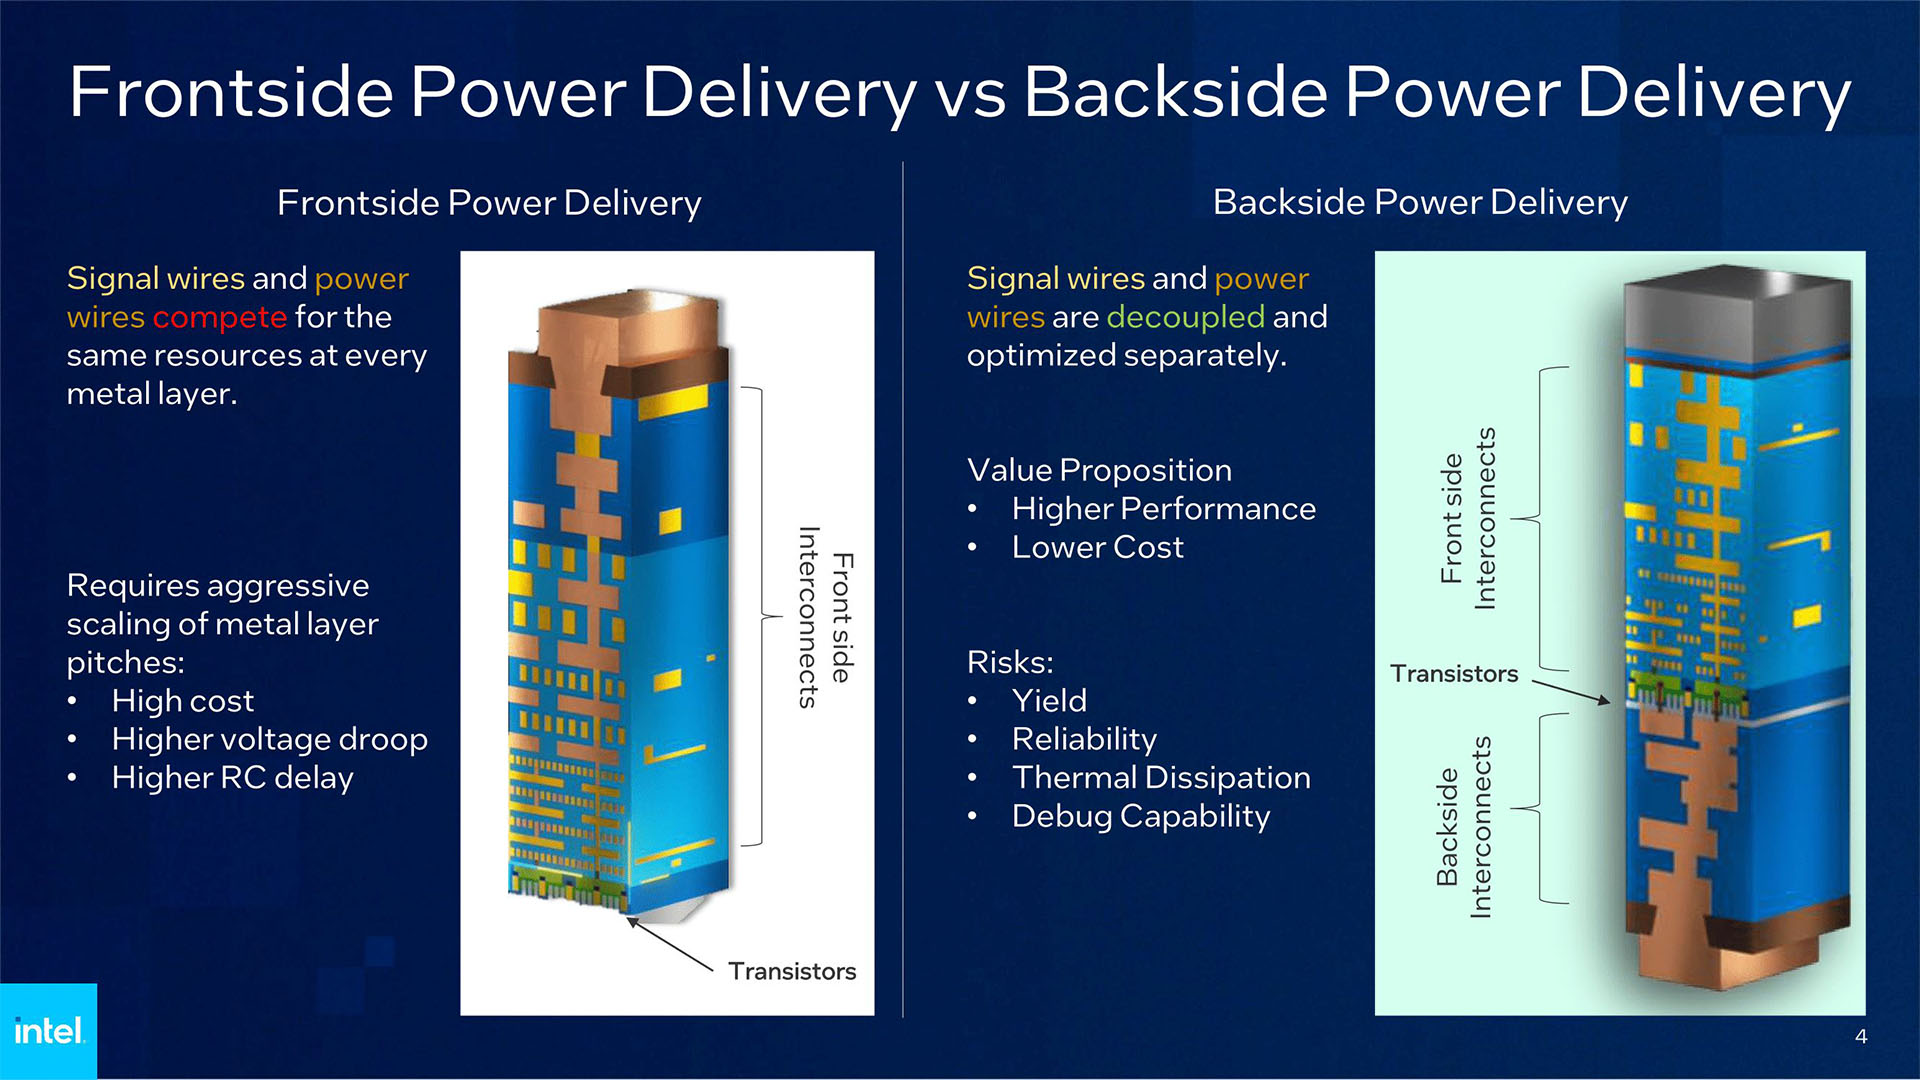 Intel PowerVia backside power delivery